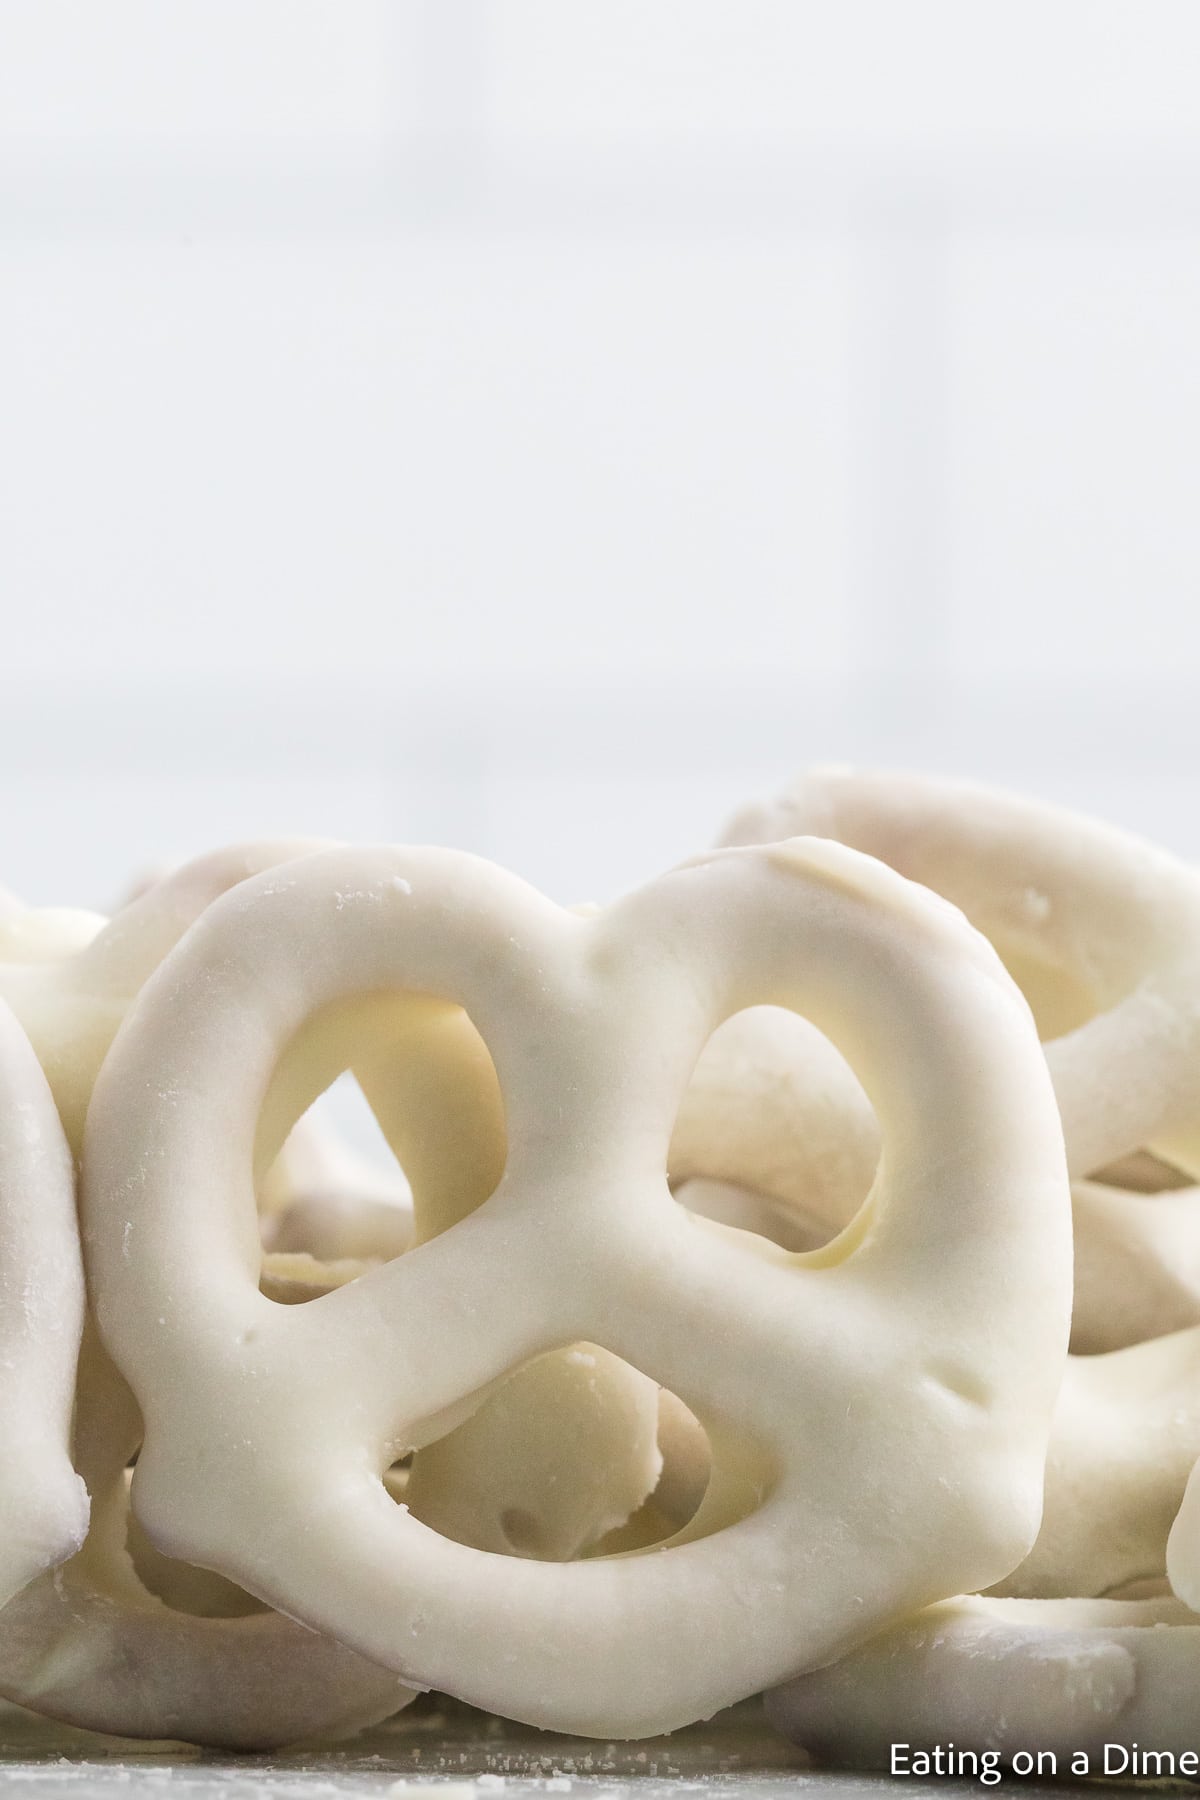 Close up image of white chocolate covered pretzels